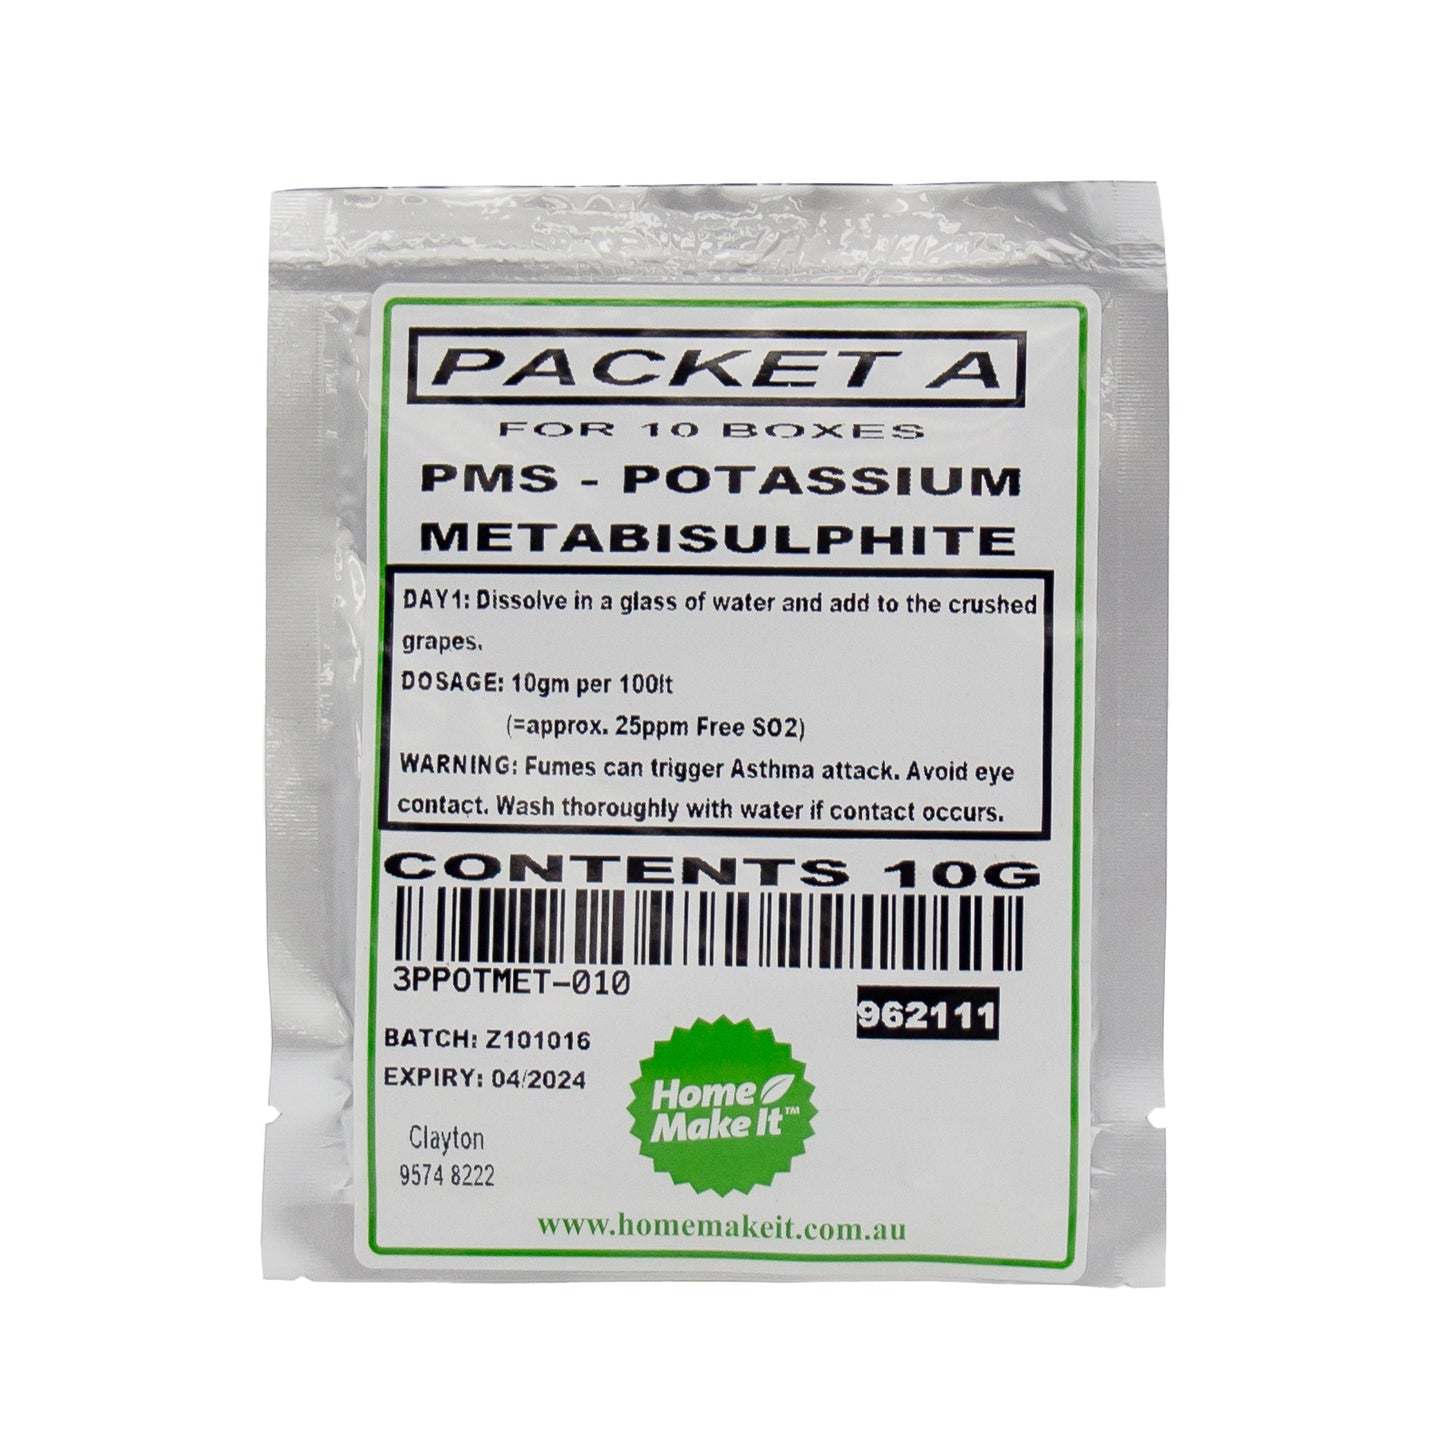 10g packet of potassium metabisulphite also known as PMS or Packet A, used in the wine making process. 